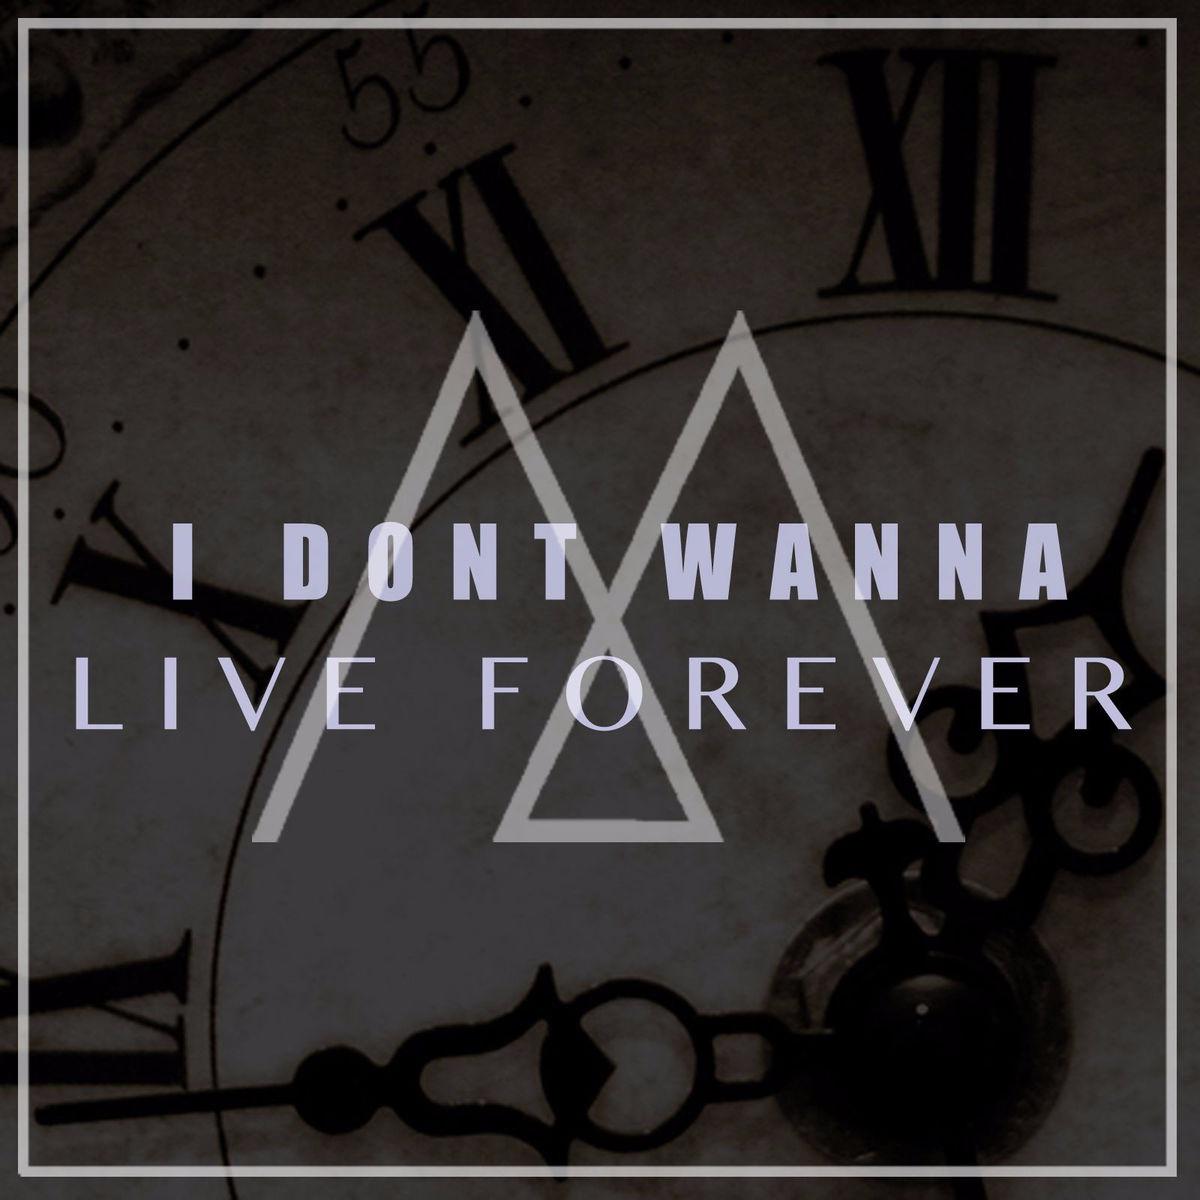 I Don't Wanna Live Forever专辑